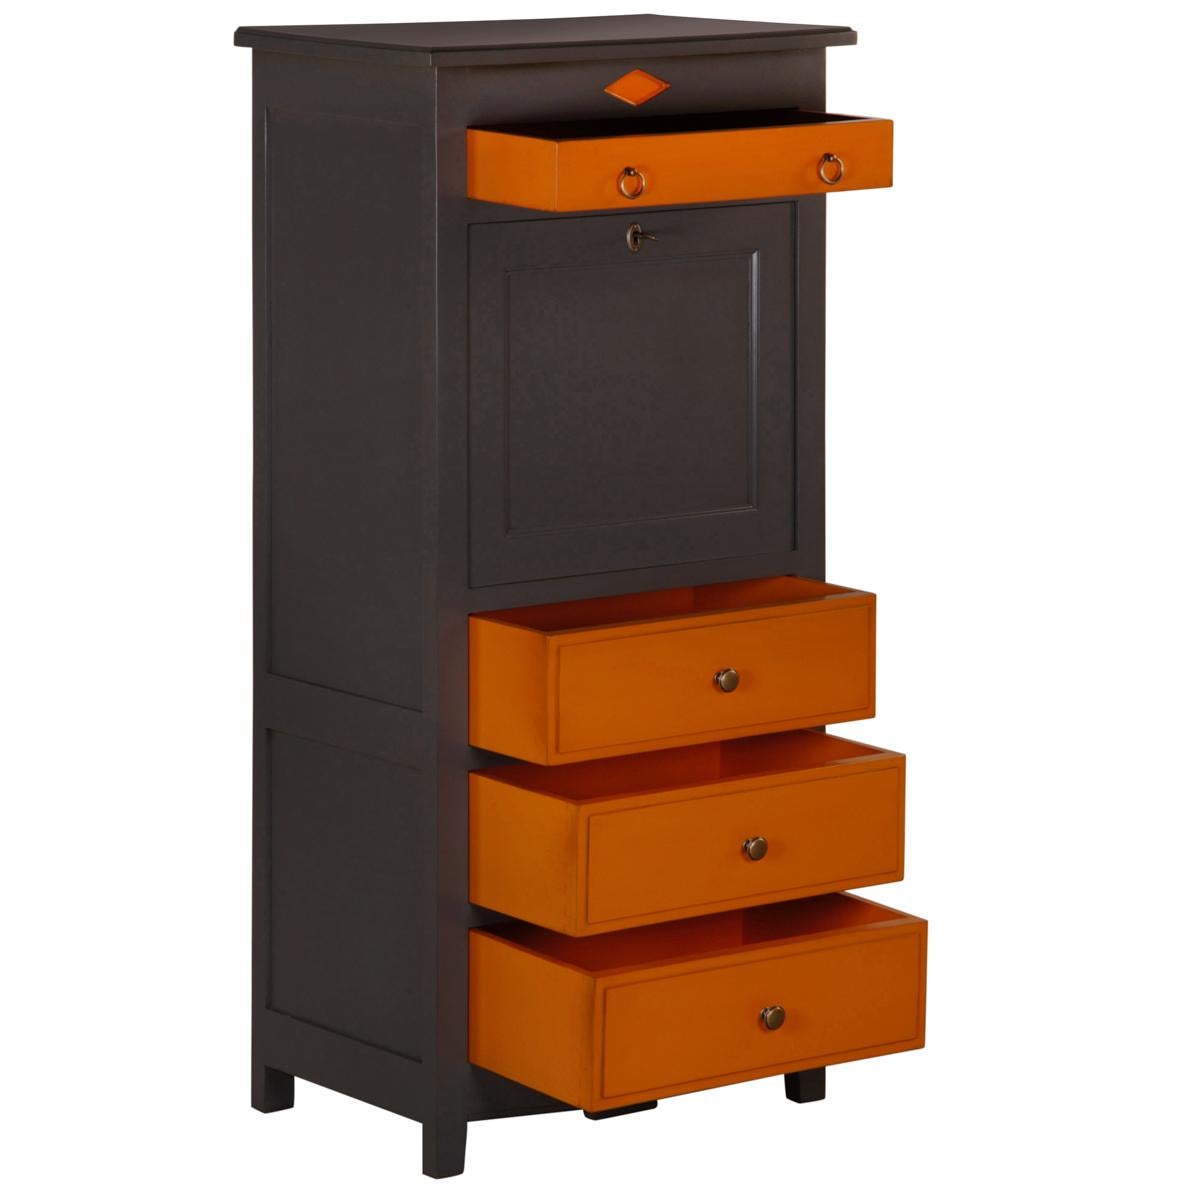 Contemporary French Directoire Style Secrétaire in Cherry Wood, Orange & Dark Grey Lacquered For Sale